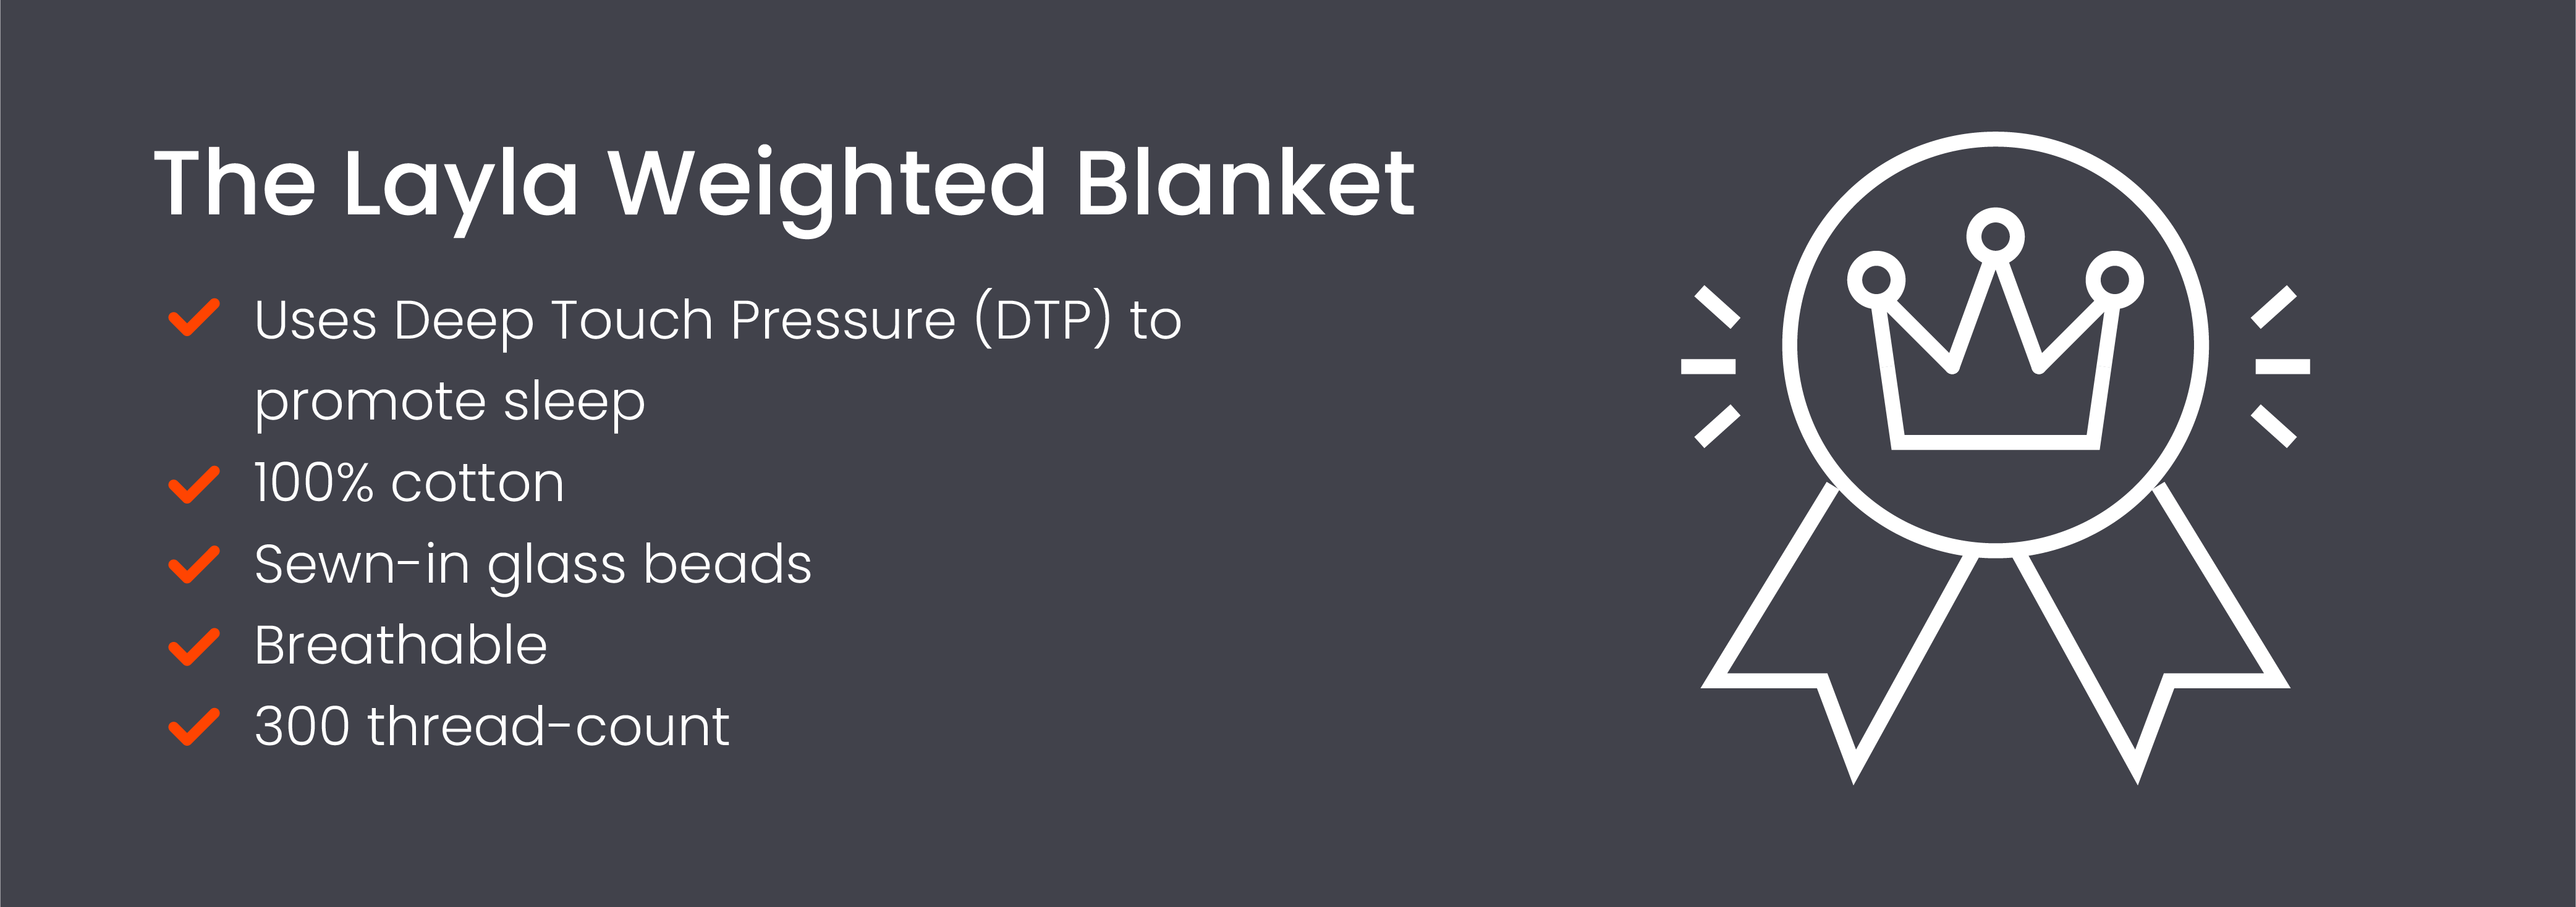 Graphic describing the Layla weighted blanket